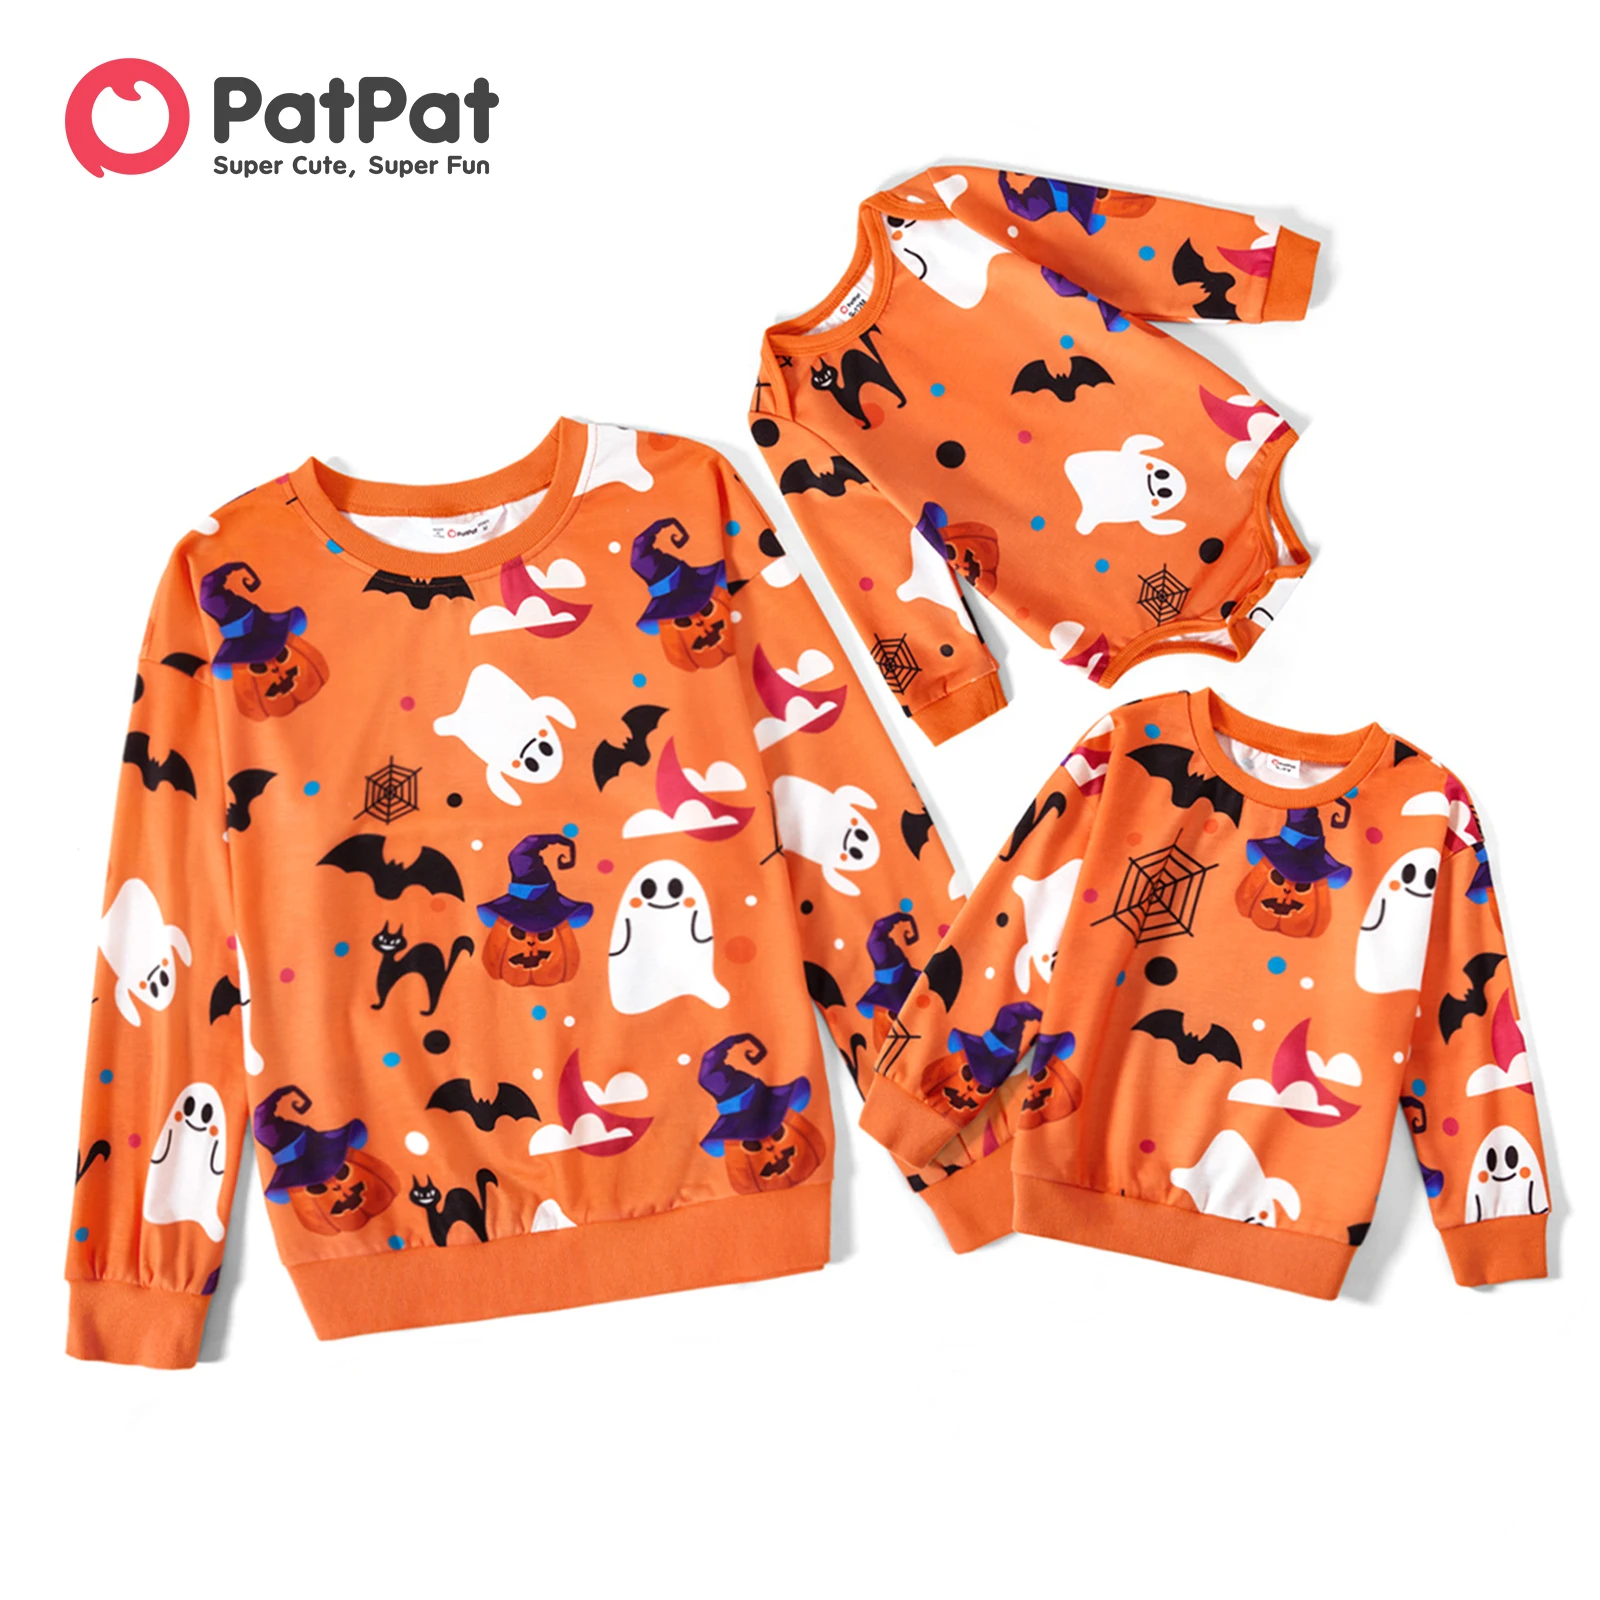 

PatPat Halloween Allover Ghost Print Orange Long-sleeve Sweatshirts for Mom and Me